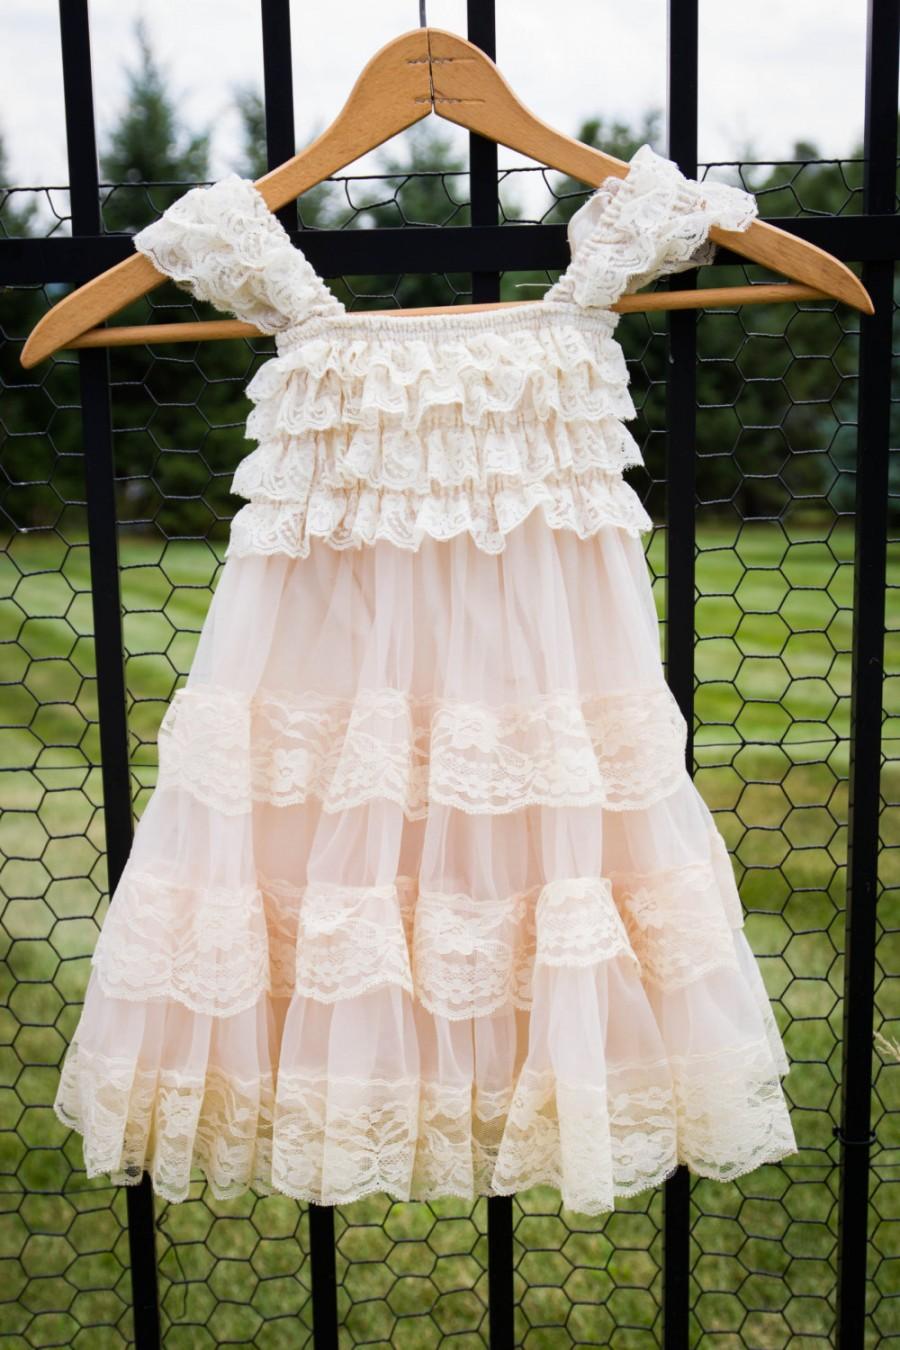 Mariage - Champagne Flower Girl Dress -Lace Pettidress -Vintage Flower Girl Dress - Shabby Chic Flower Girl Dress - Lace Flower Girl Dresses - Rustic